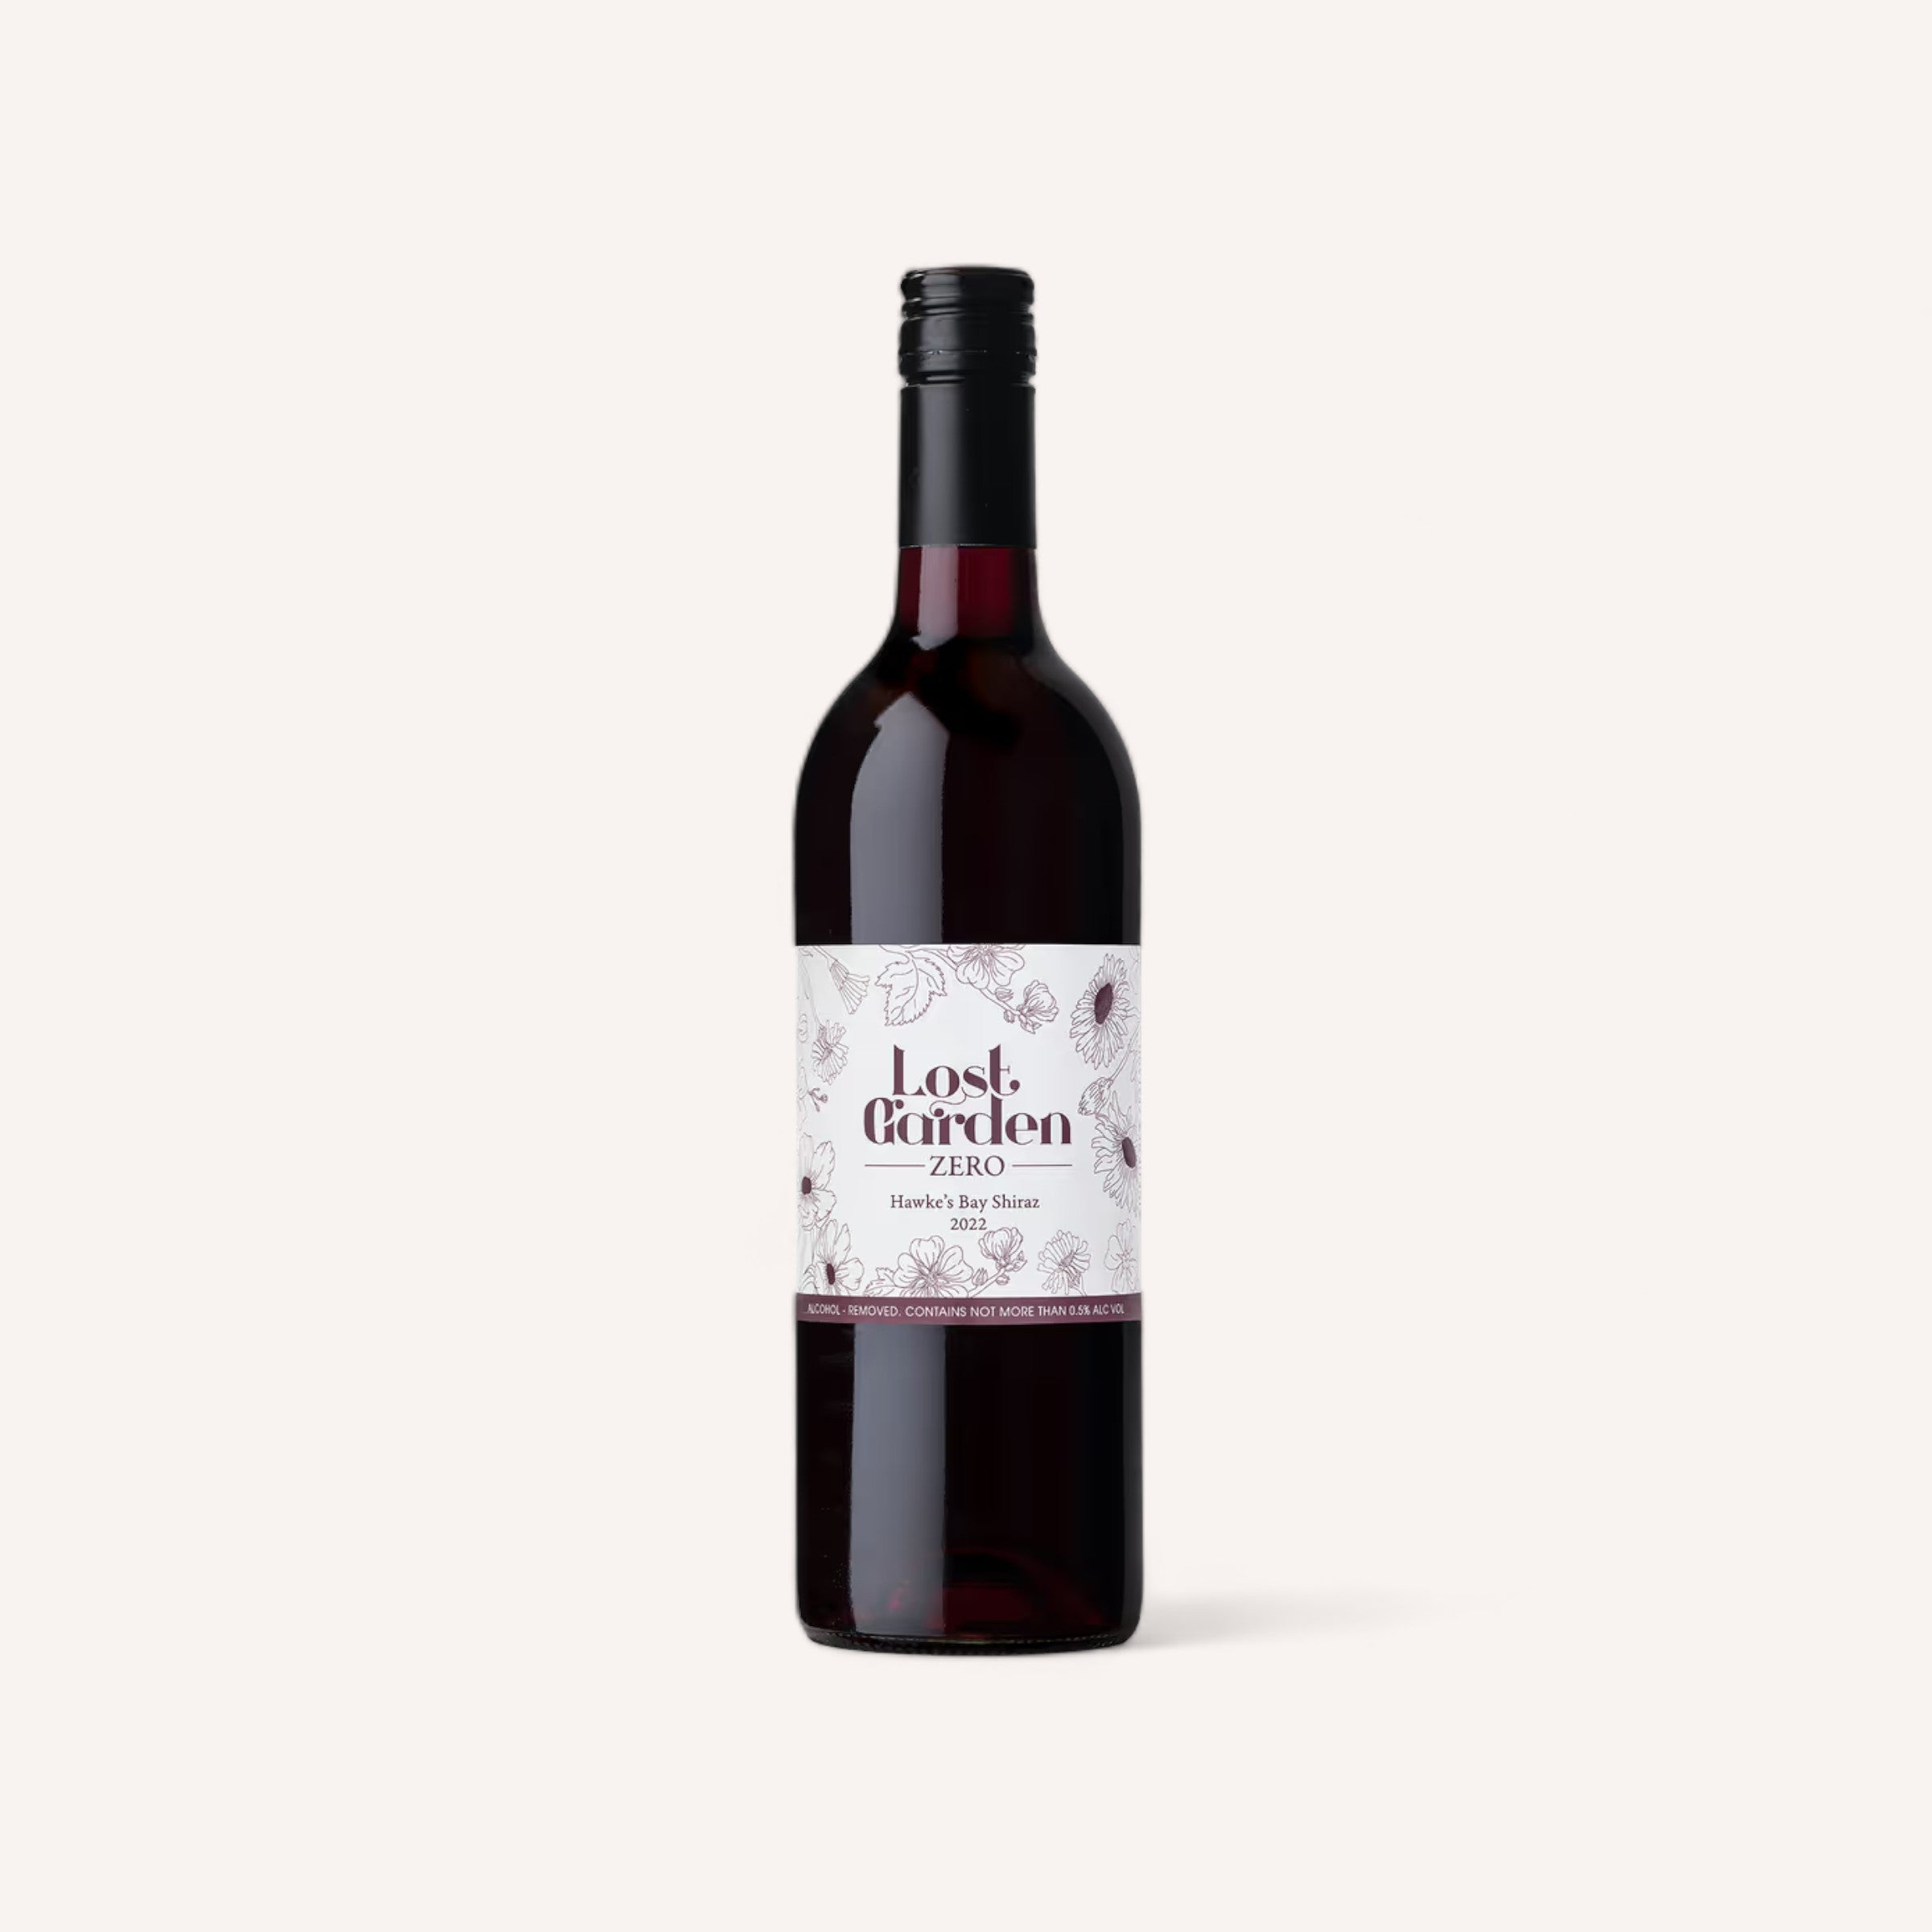 A bottle of "Shiraz Wine by Lost Garden" Hawkes Bay standing against a white background.